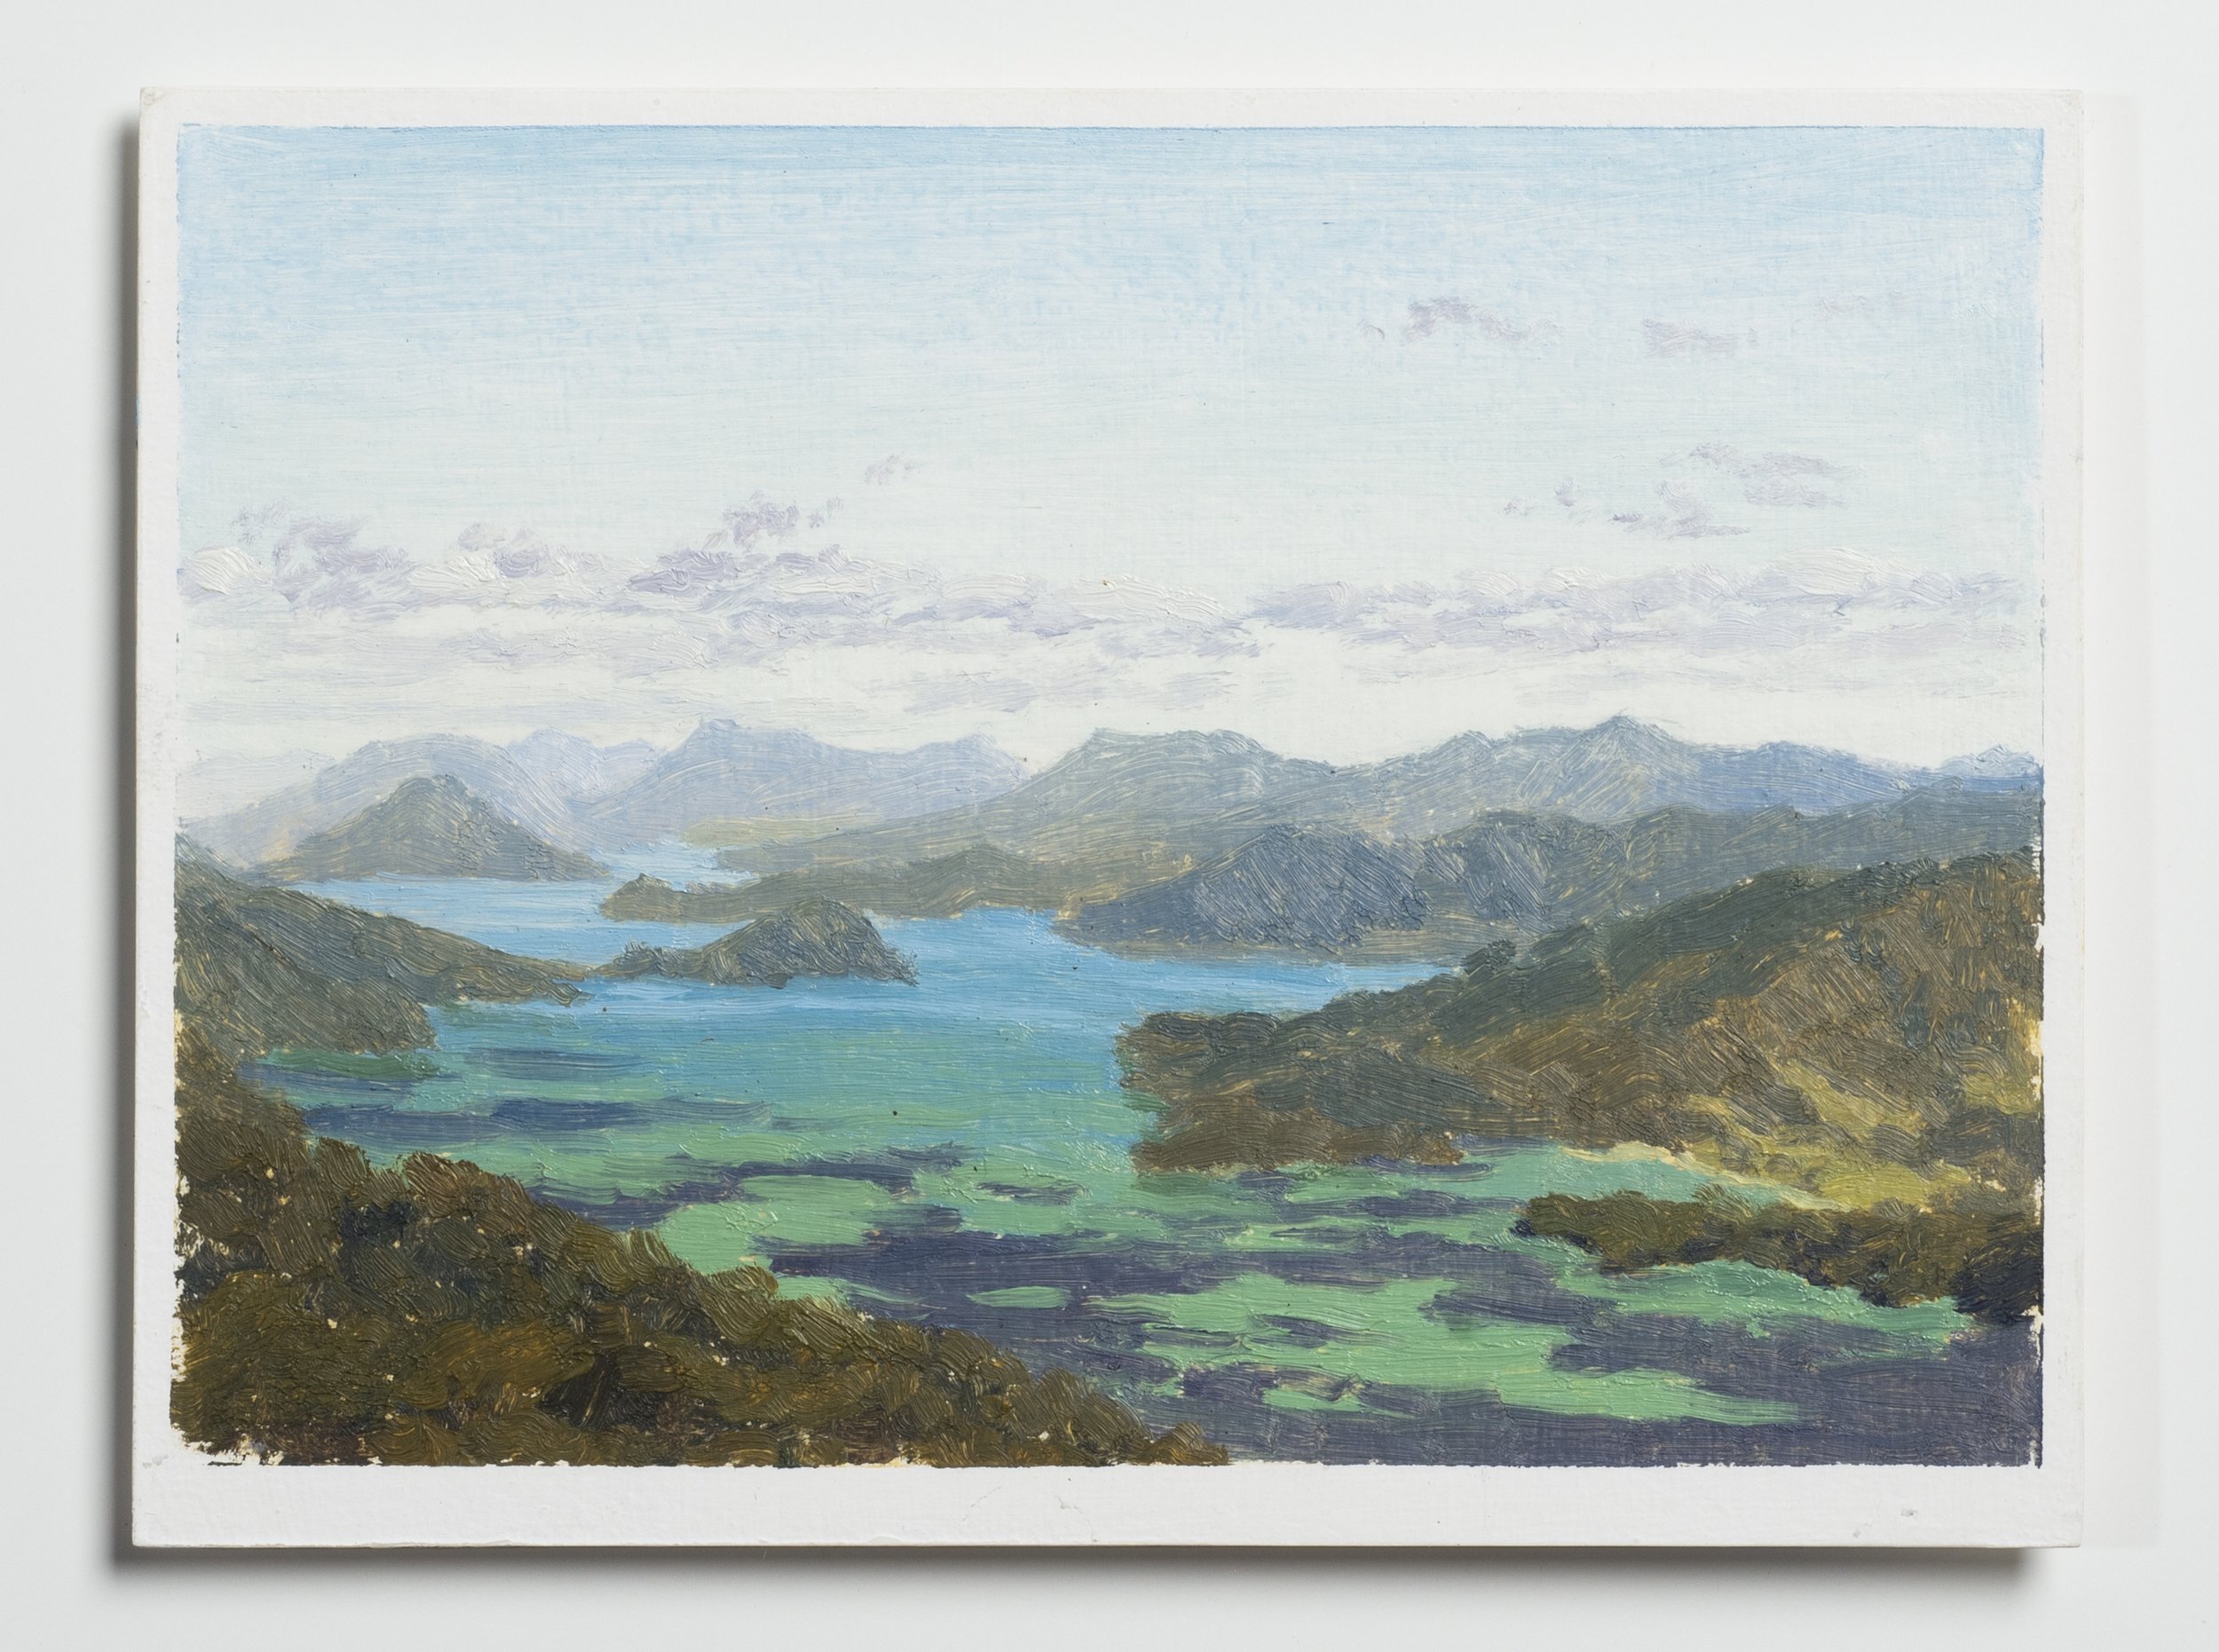 Walking and painting Te Araroa Trail, the 3000km trail traversing the length of New Zealand. A ‘plein air’ record of the landscape encountered each day, accumulating to 141 paintings